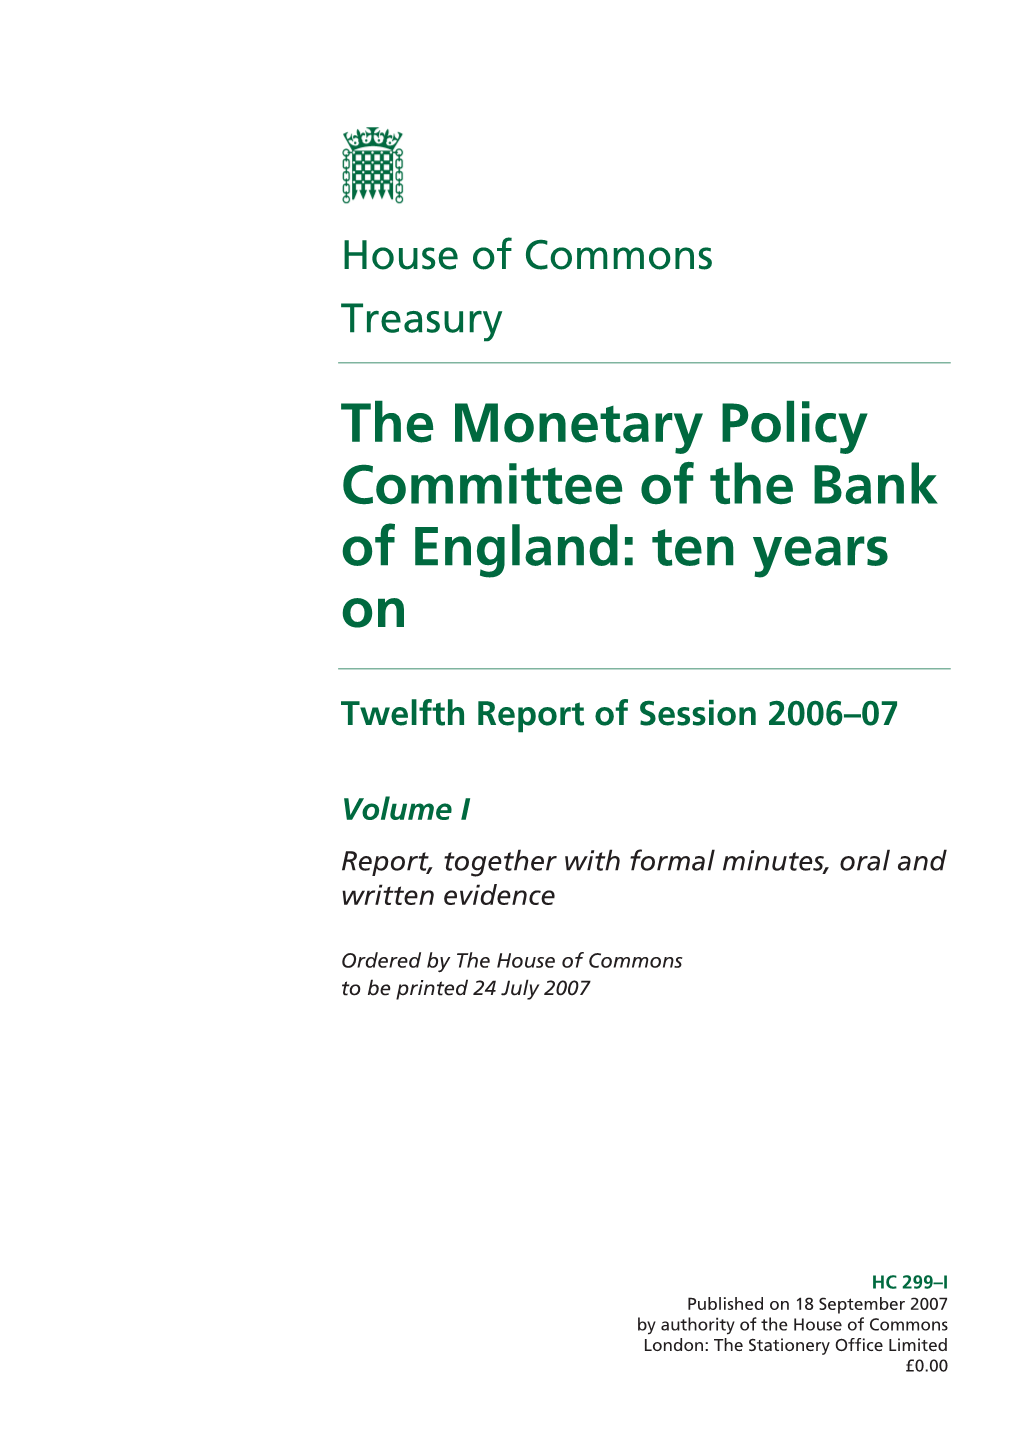 The Monetary Policy Committee of the Bank of England: Ten Years On